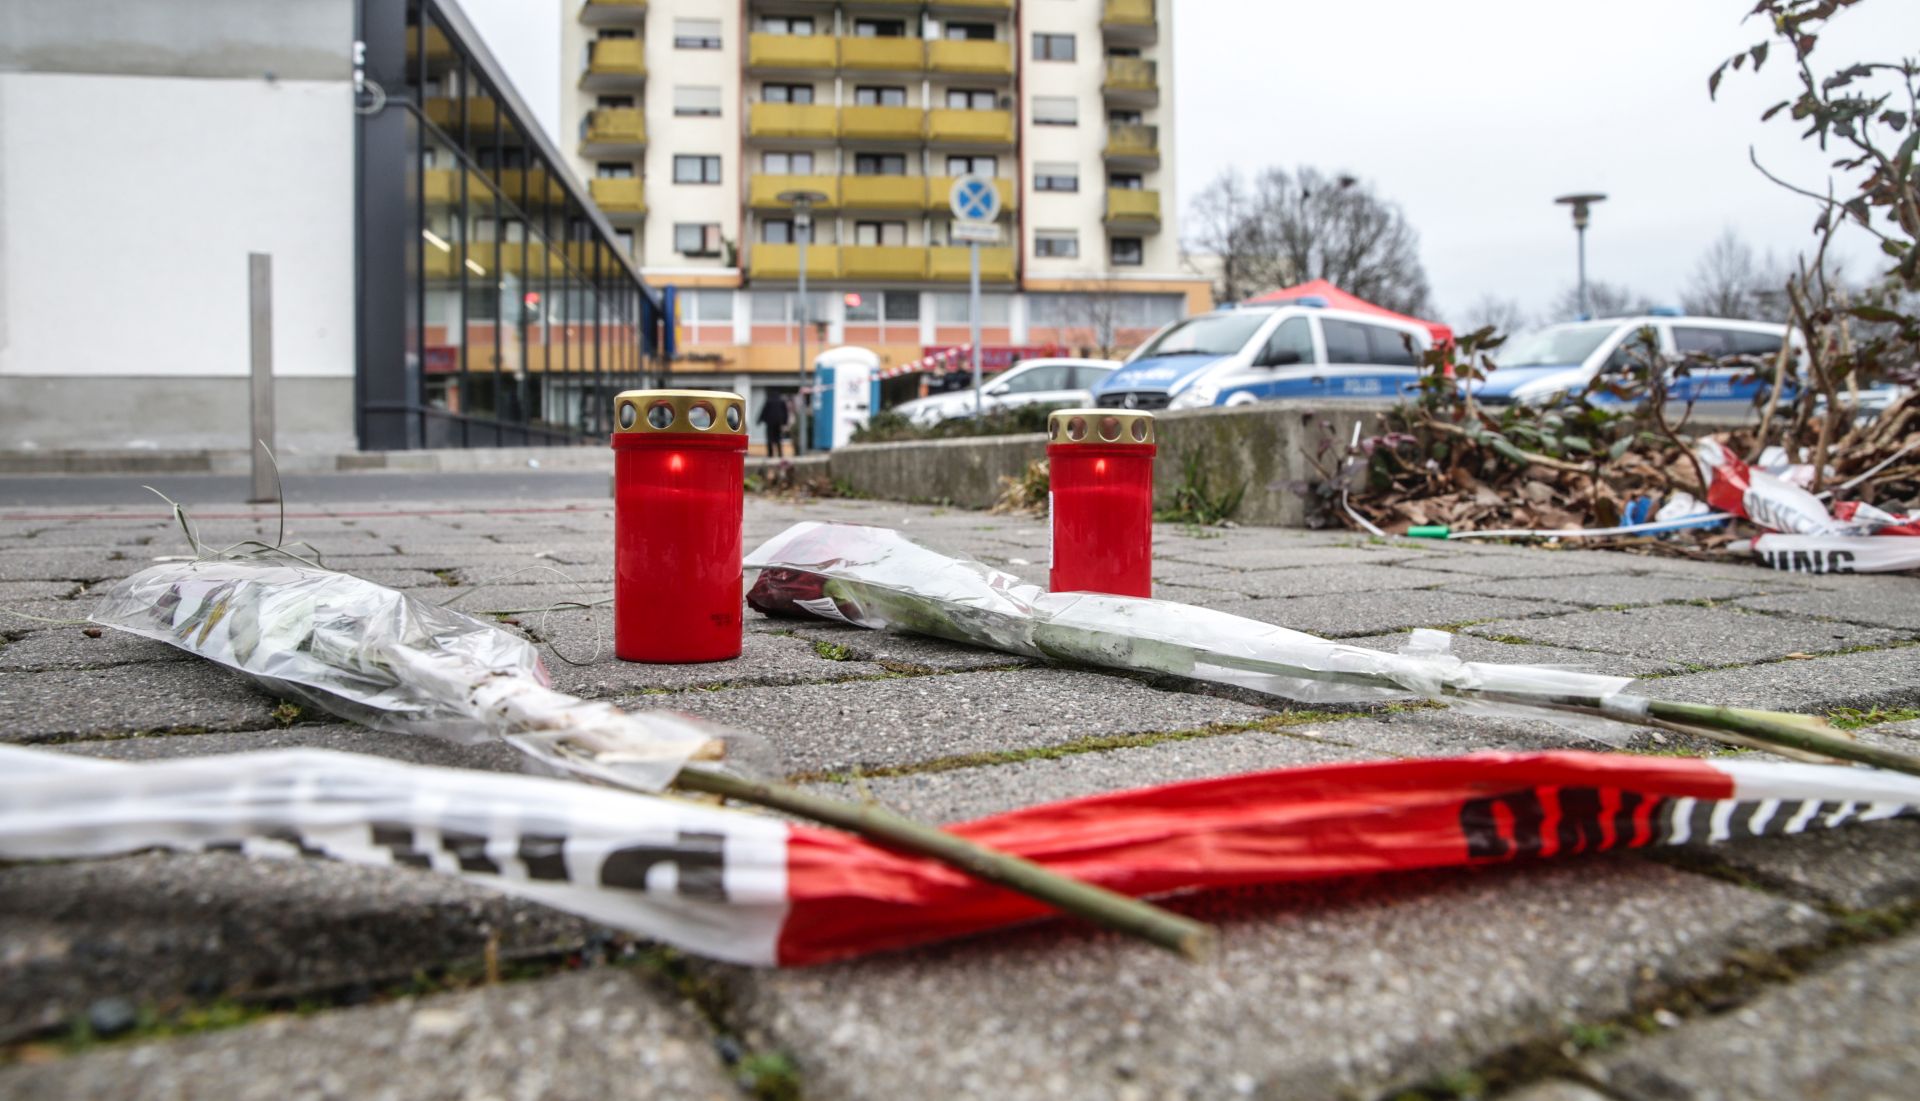 epa08229796 Flowers and candles are placed near a crime scene were five people shoot dead, after two shootings in Hanau, Germany, 20 February 2020. According to media reports, at least nine people were killed in two shootings at shisha bars in the western German city of Hanau, on the outskirts of Frankfurt on 19 February 2020.  EPA/ARMANDO BABANI